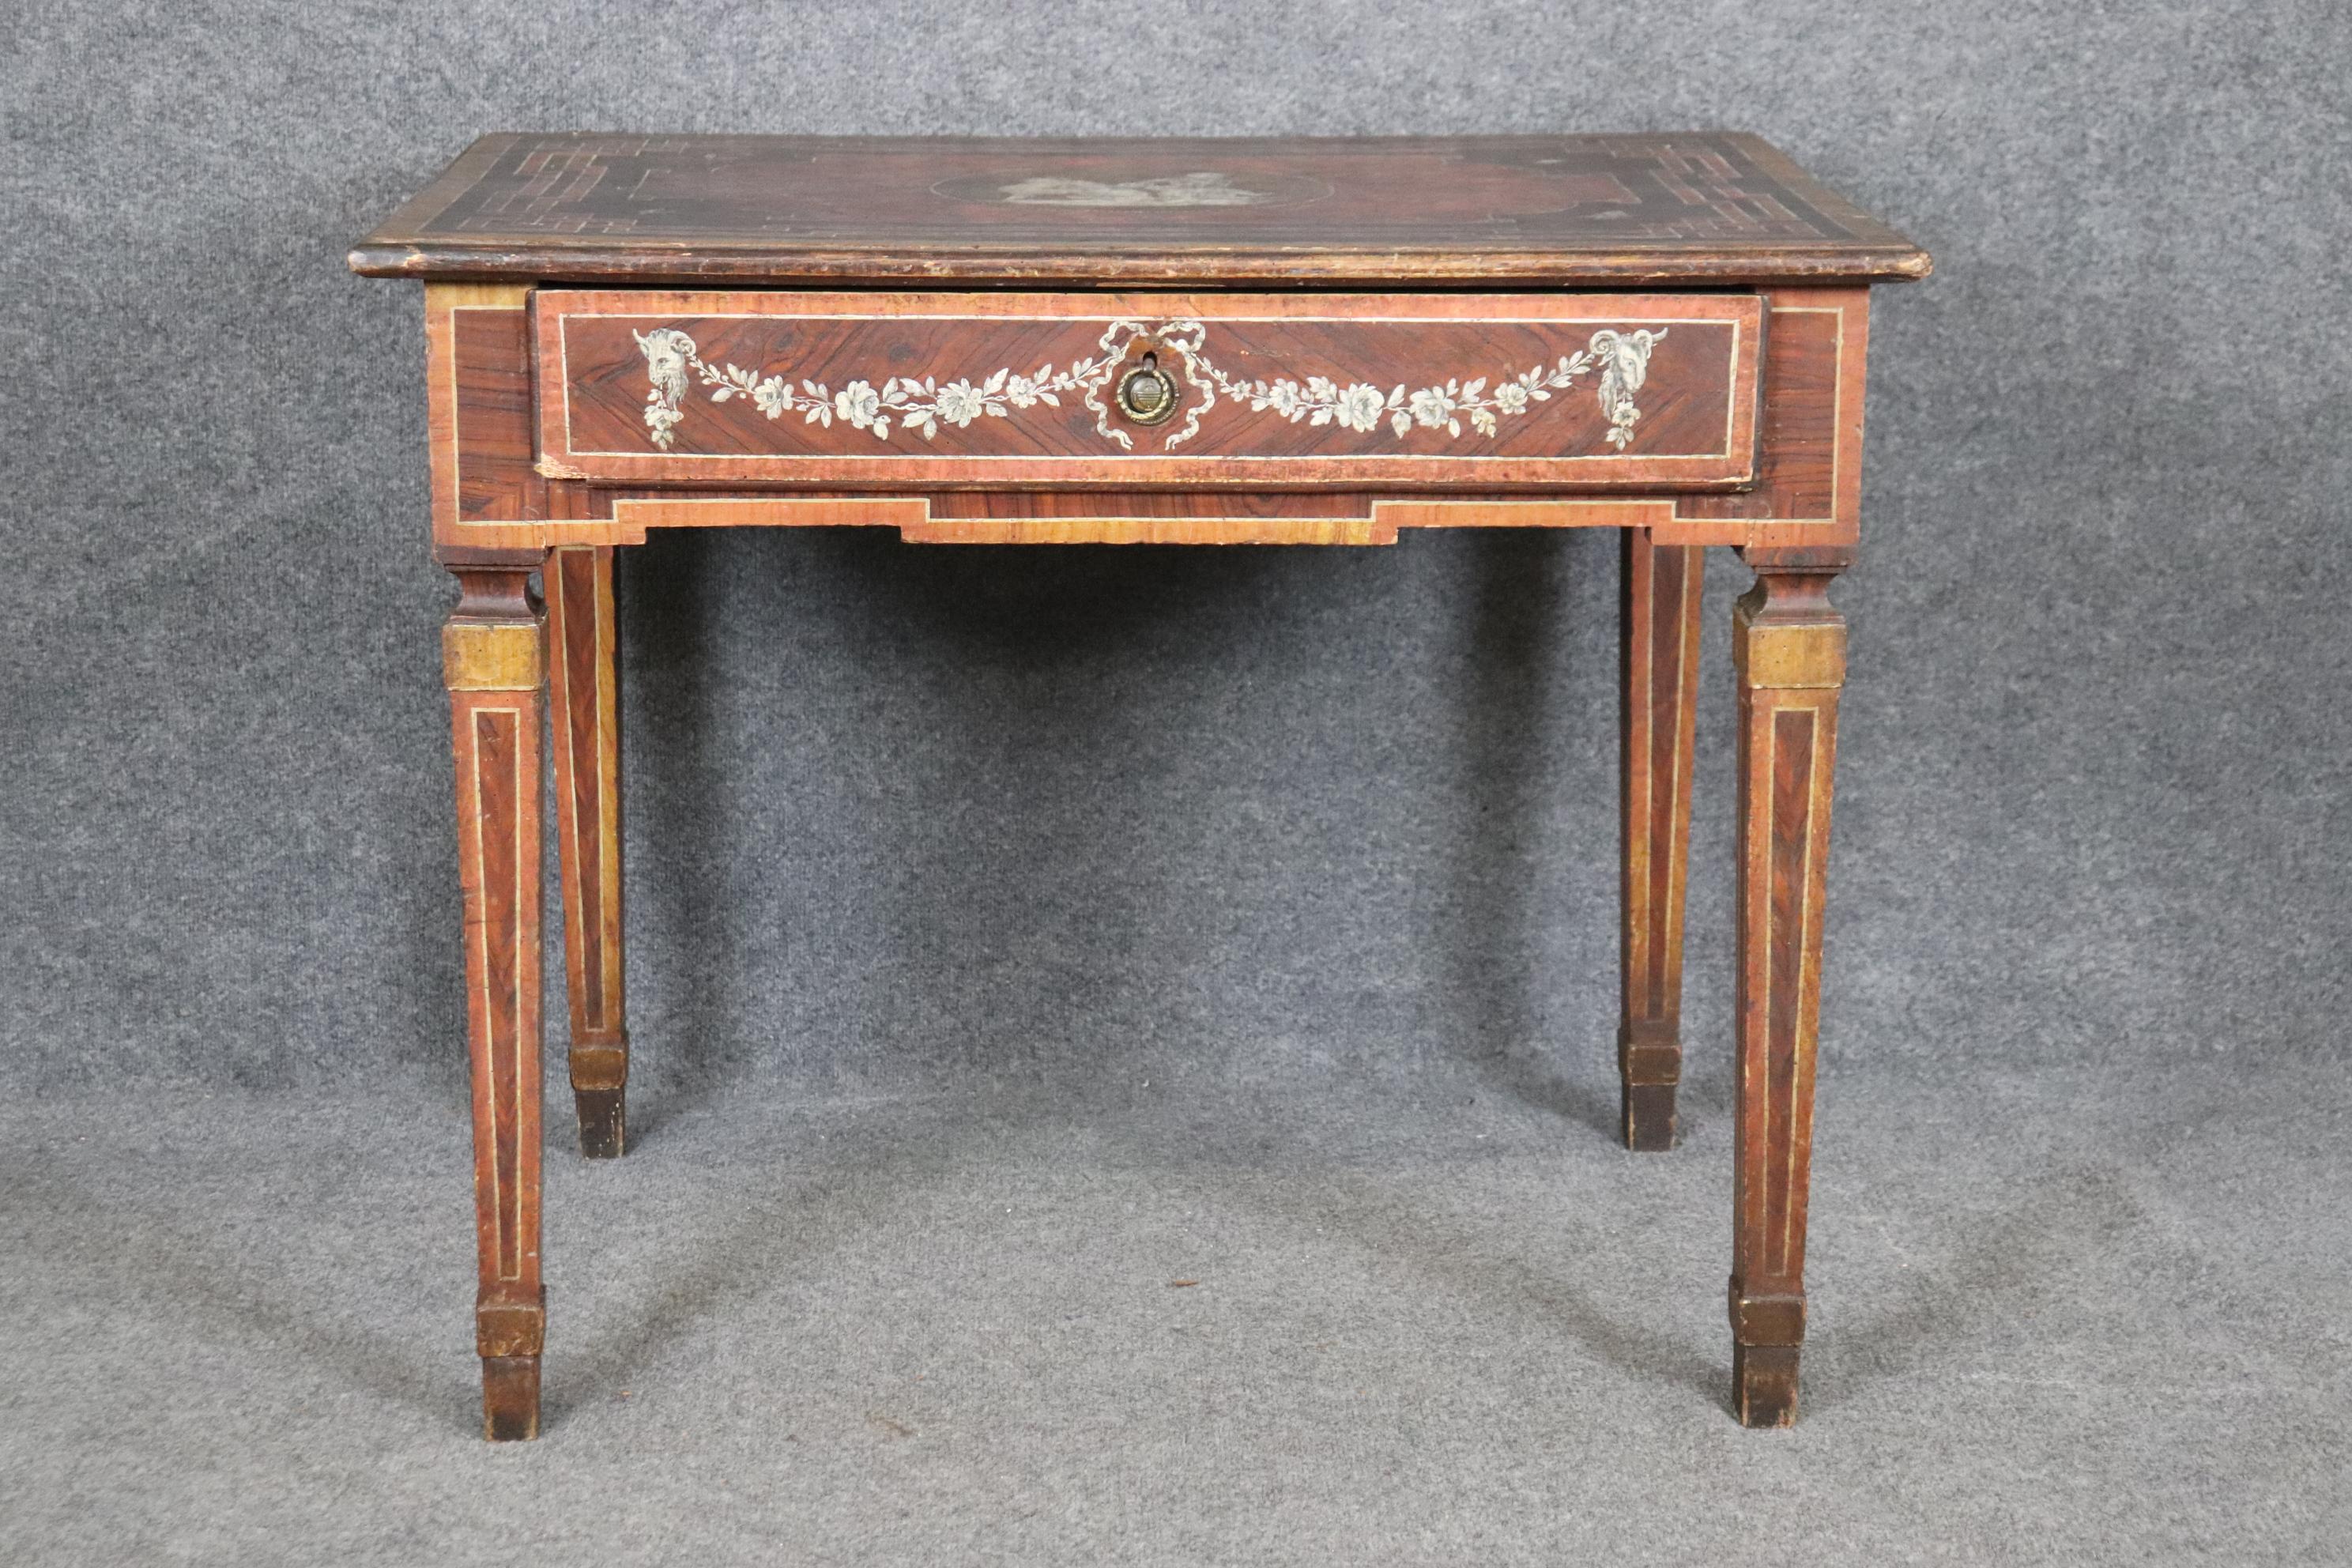 This is a gorgeous smaller true gem of a desk from the middle part of the 1700s from Italy. The desk is made of walnut and pine and has a single drawer with all the traits one expects from fine antique Italian furniture such as age checking, painted